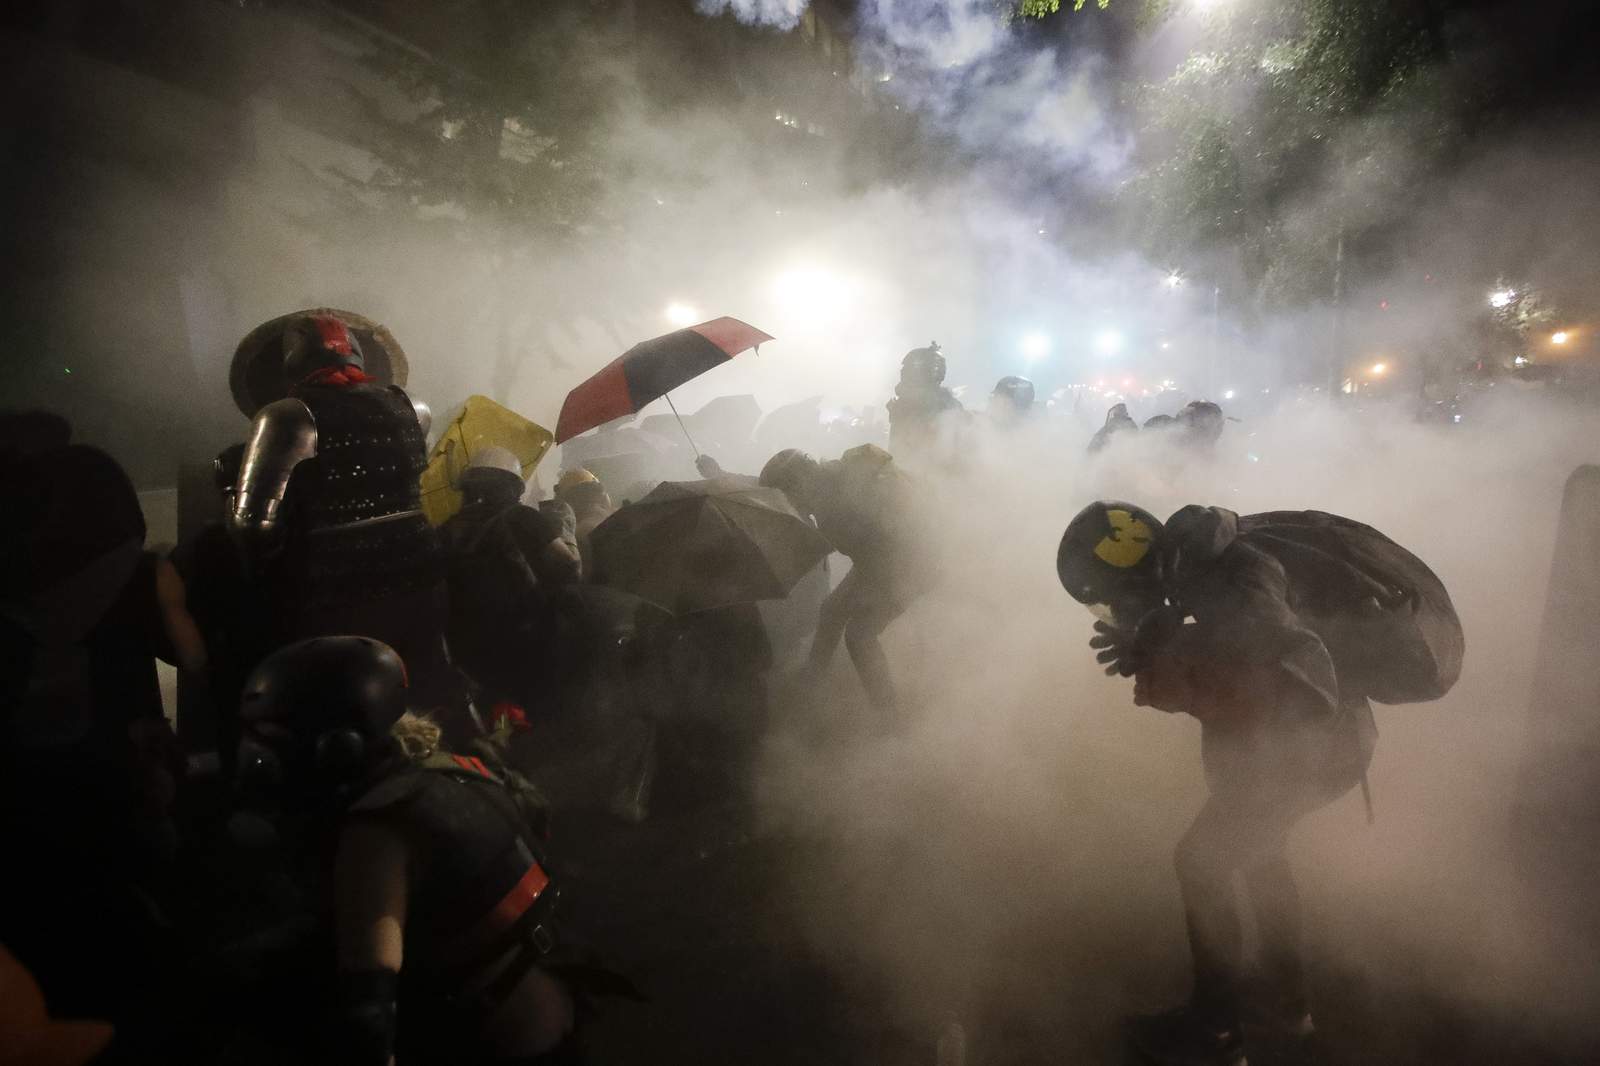 Lack of study and oversight raises concerns about tear gas